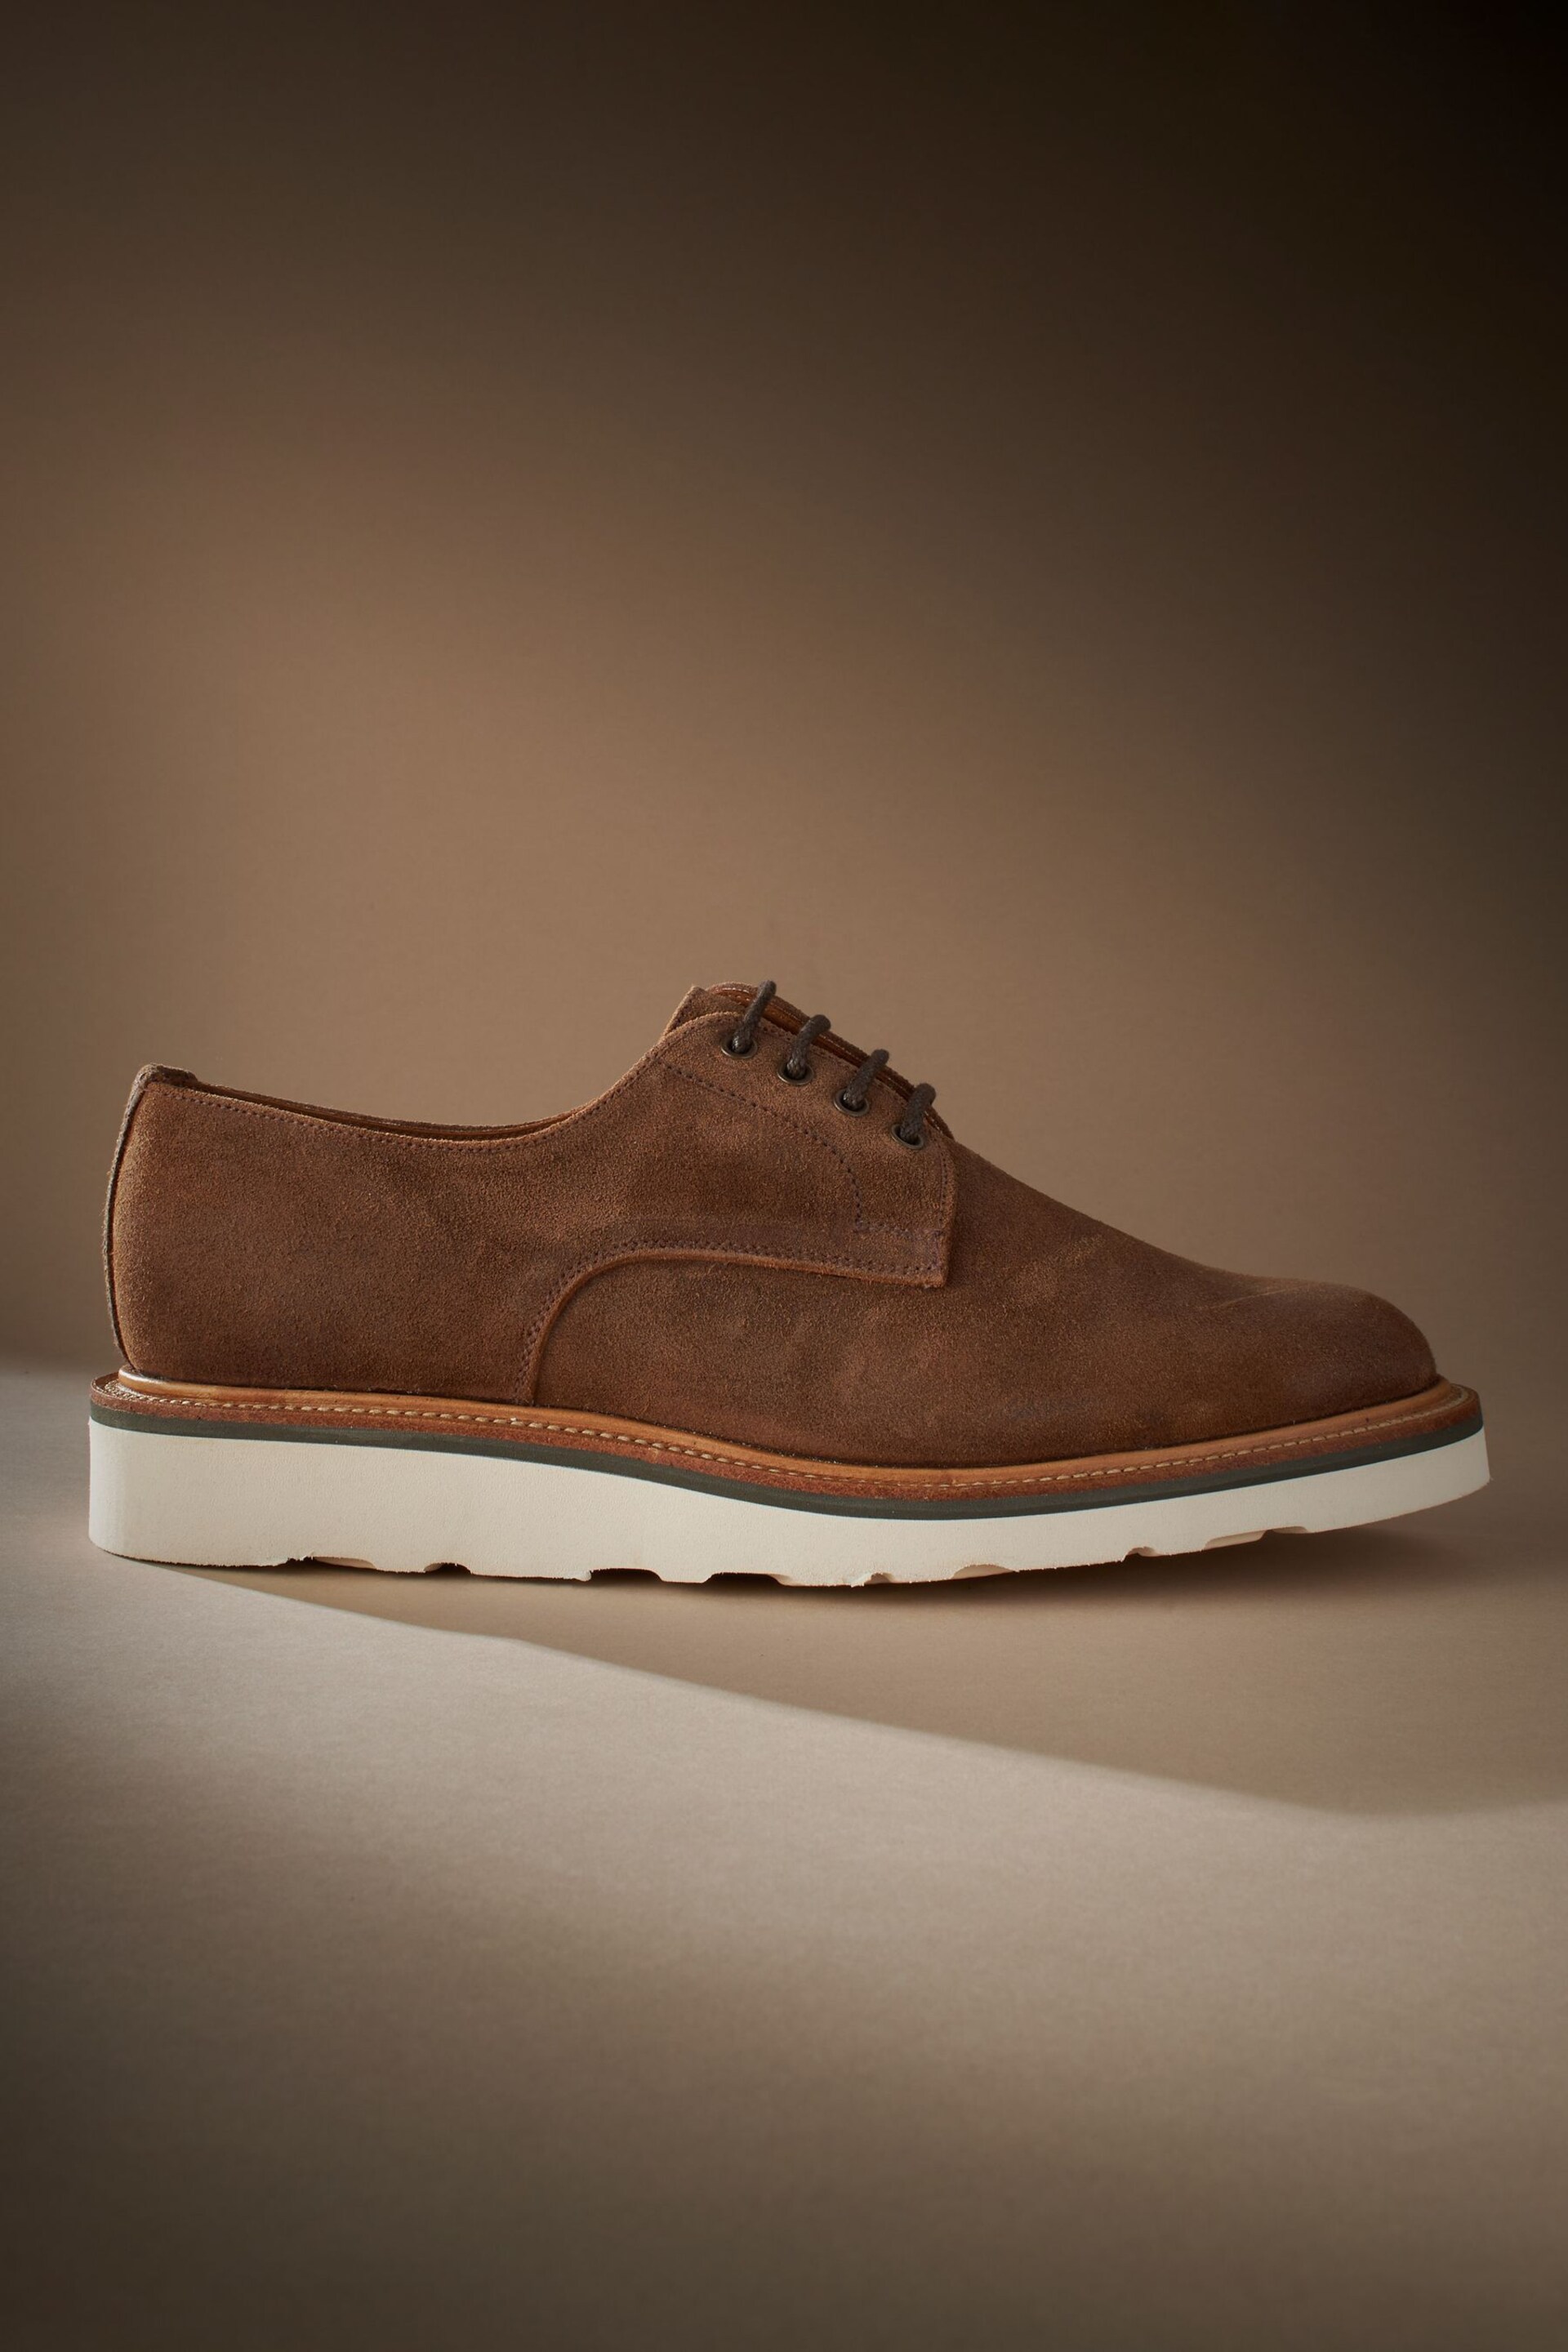 Tan Brown Suede Sanders for Next Wedge Derby Shoes - Image 2 of 7